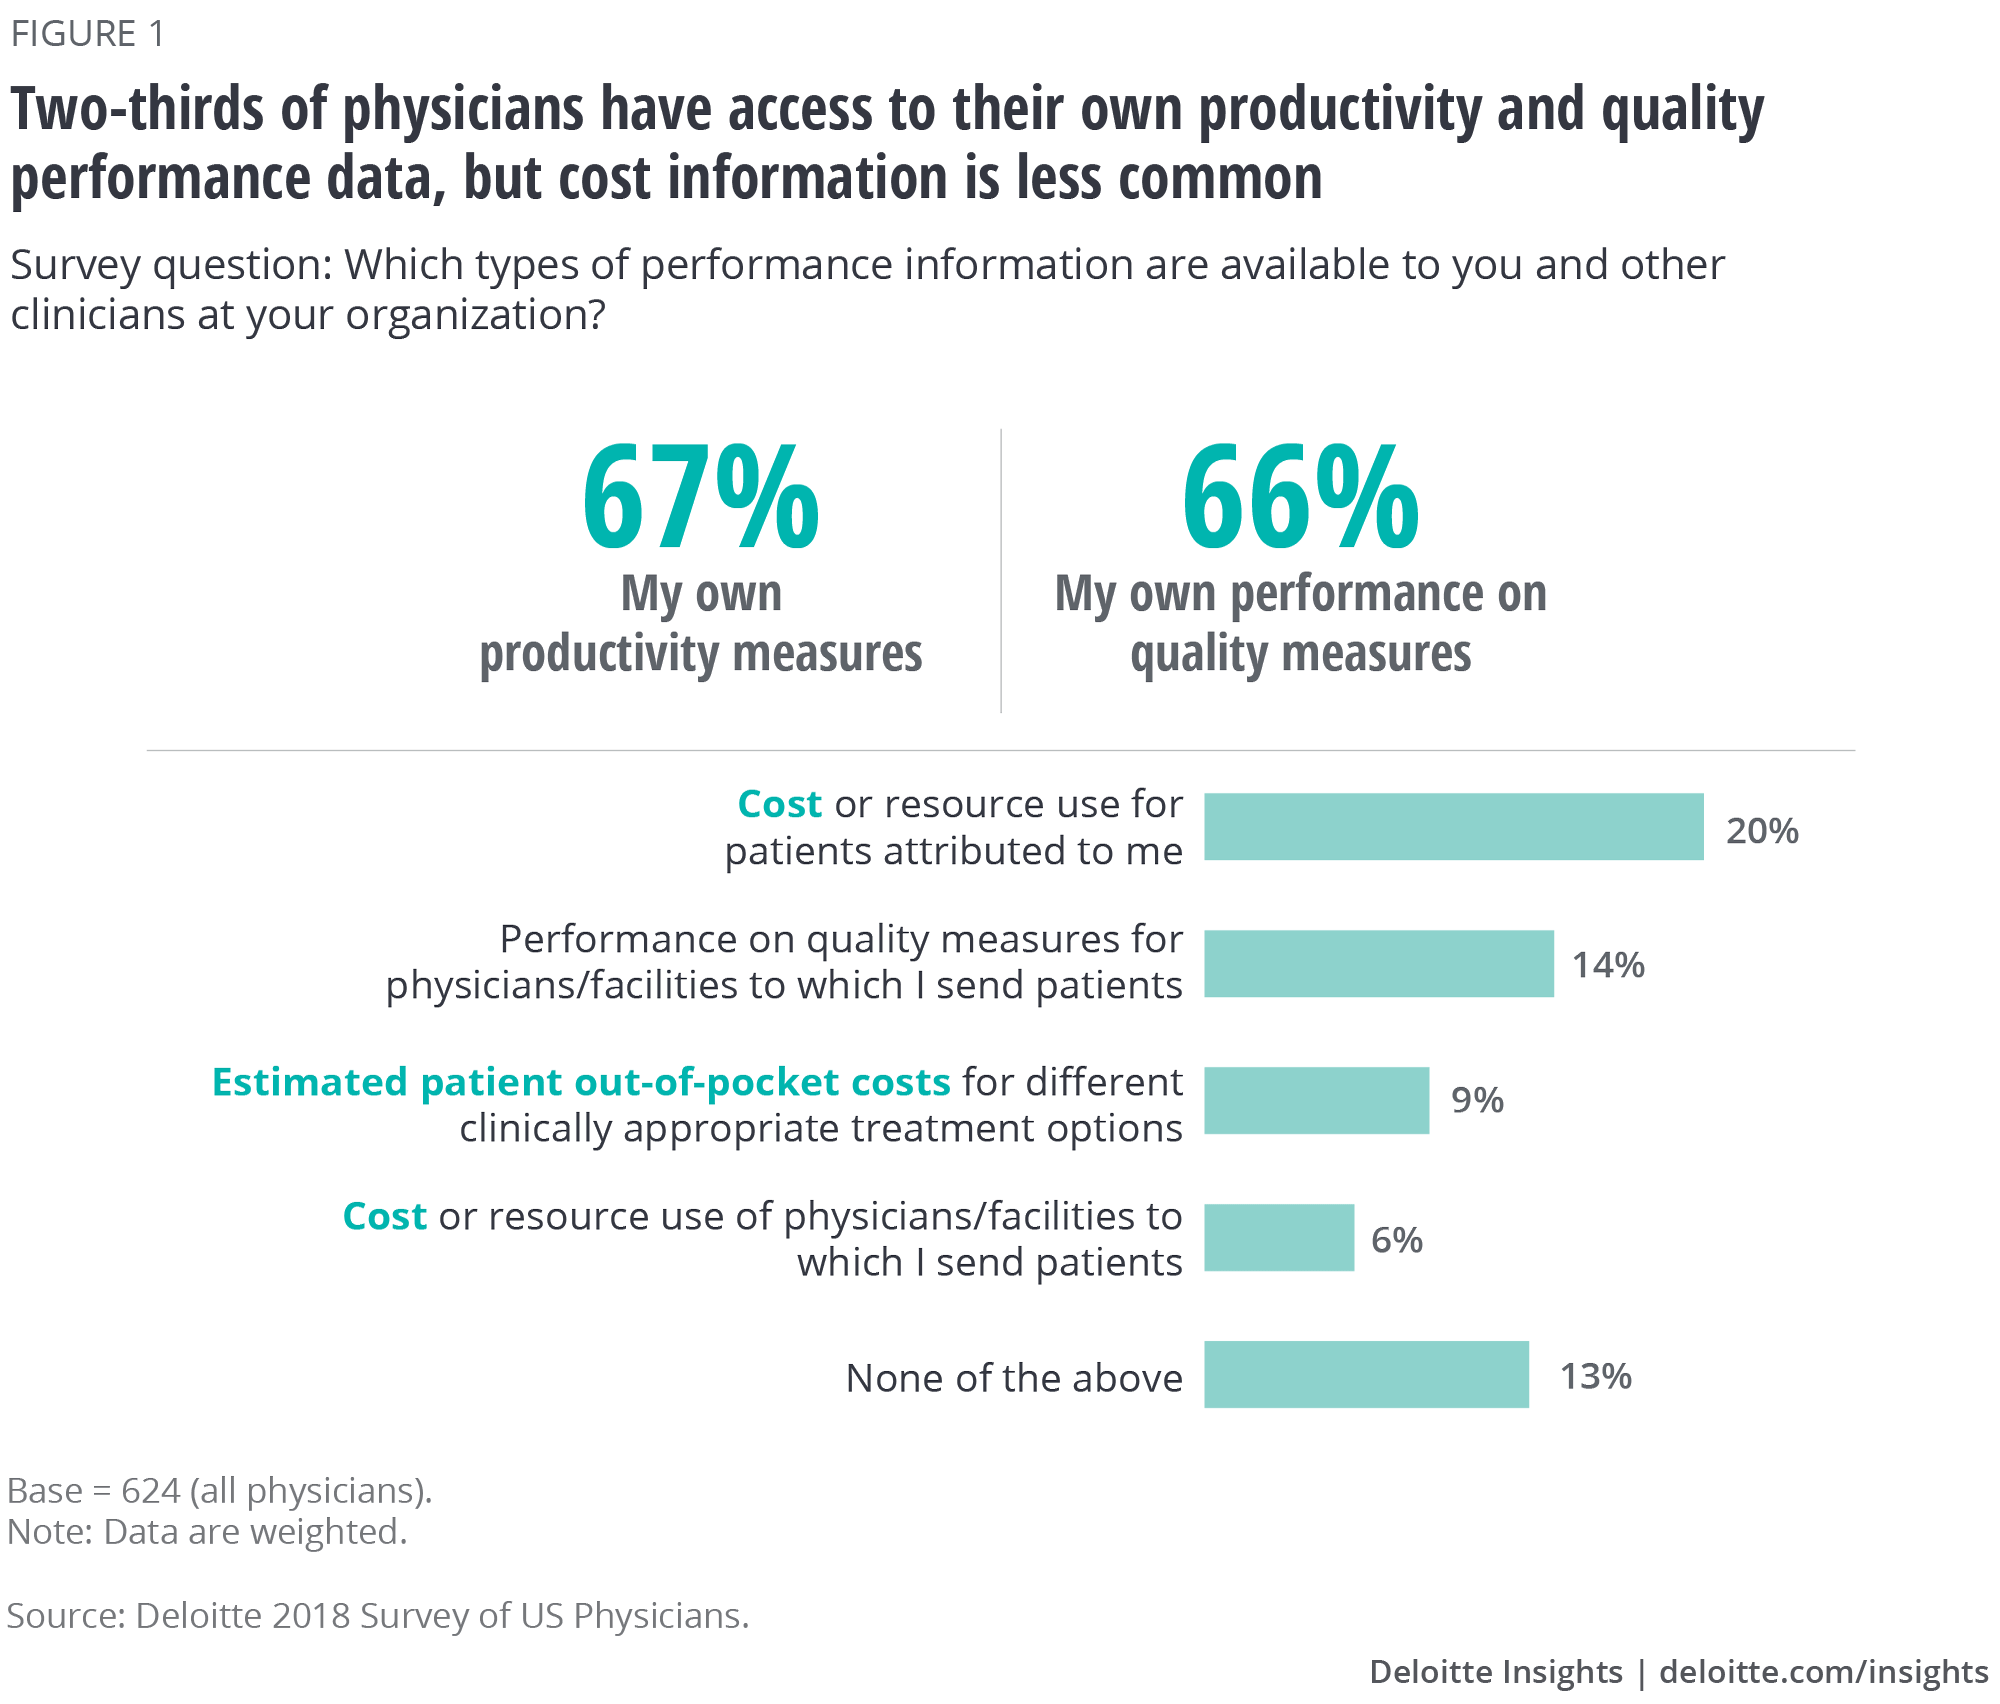 Two-thirds of physicians have access to their own productivity and quality performance data, but cost information is much less commonly available